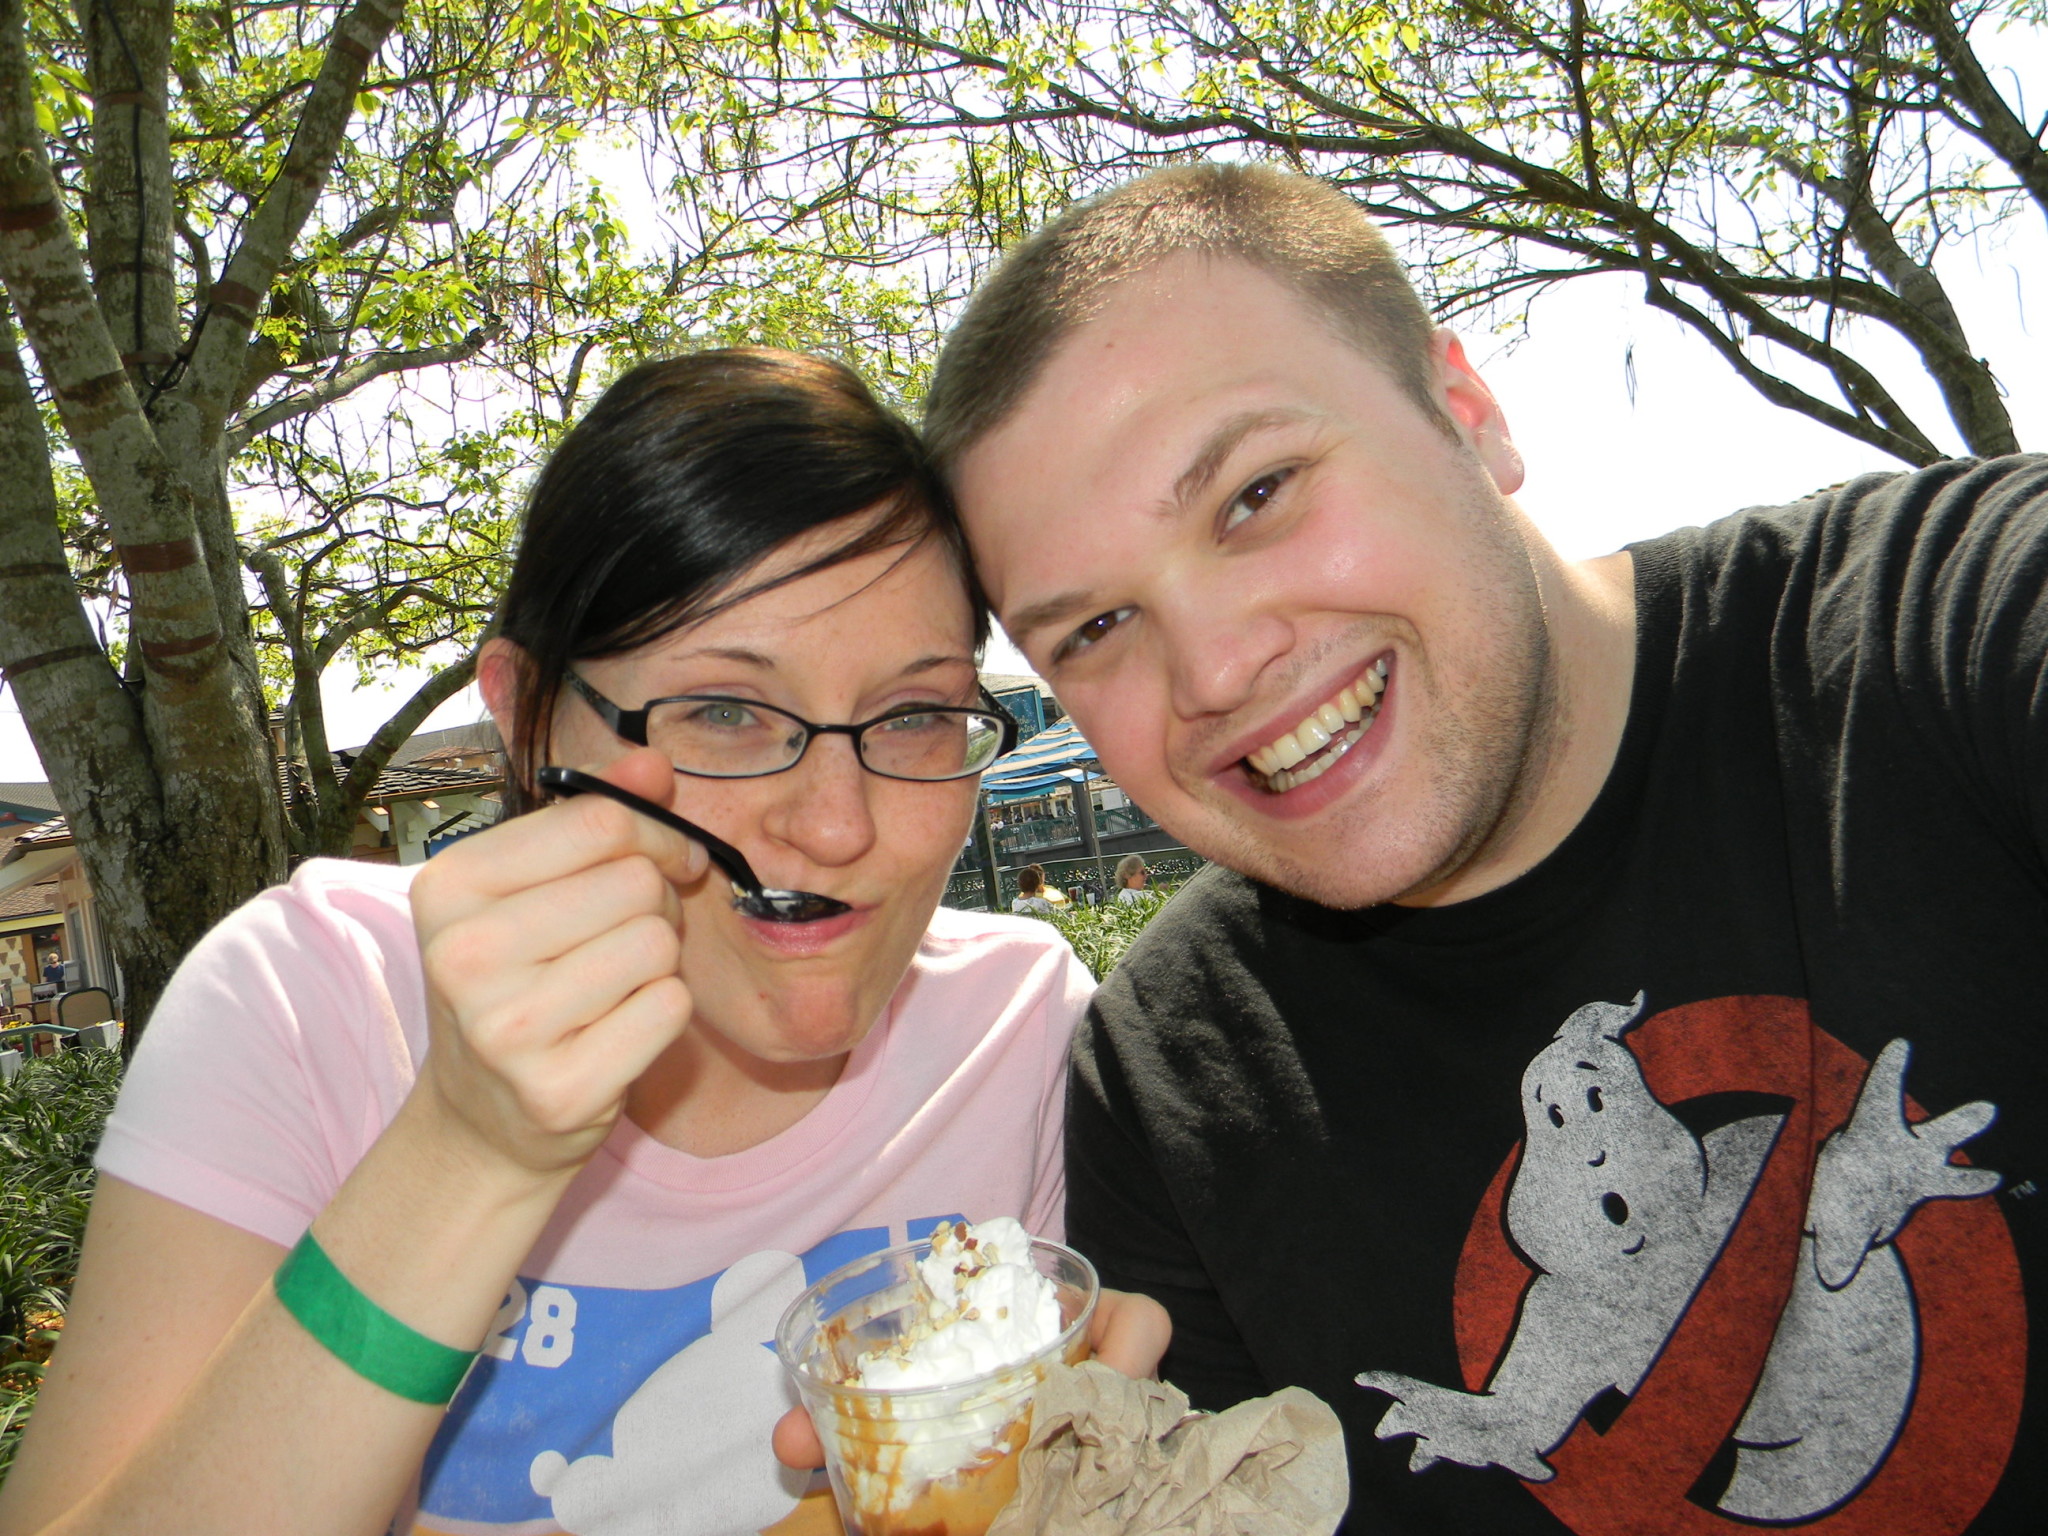 Cool Off On A Hot Disney Day With Delicious ICE CREAM at Walt Disney World